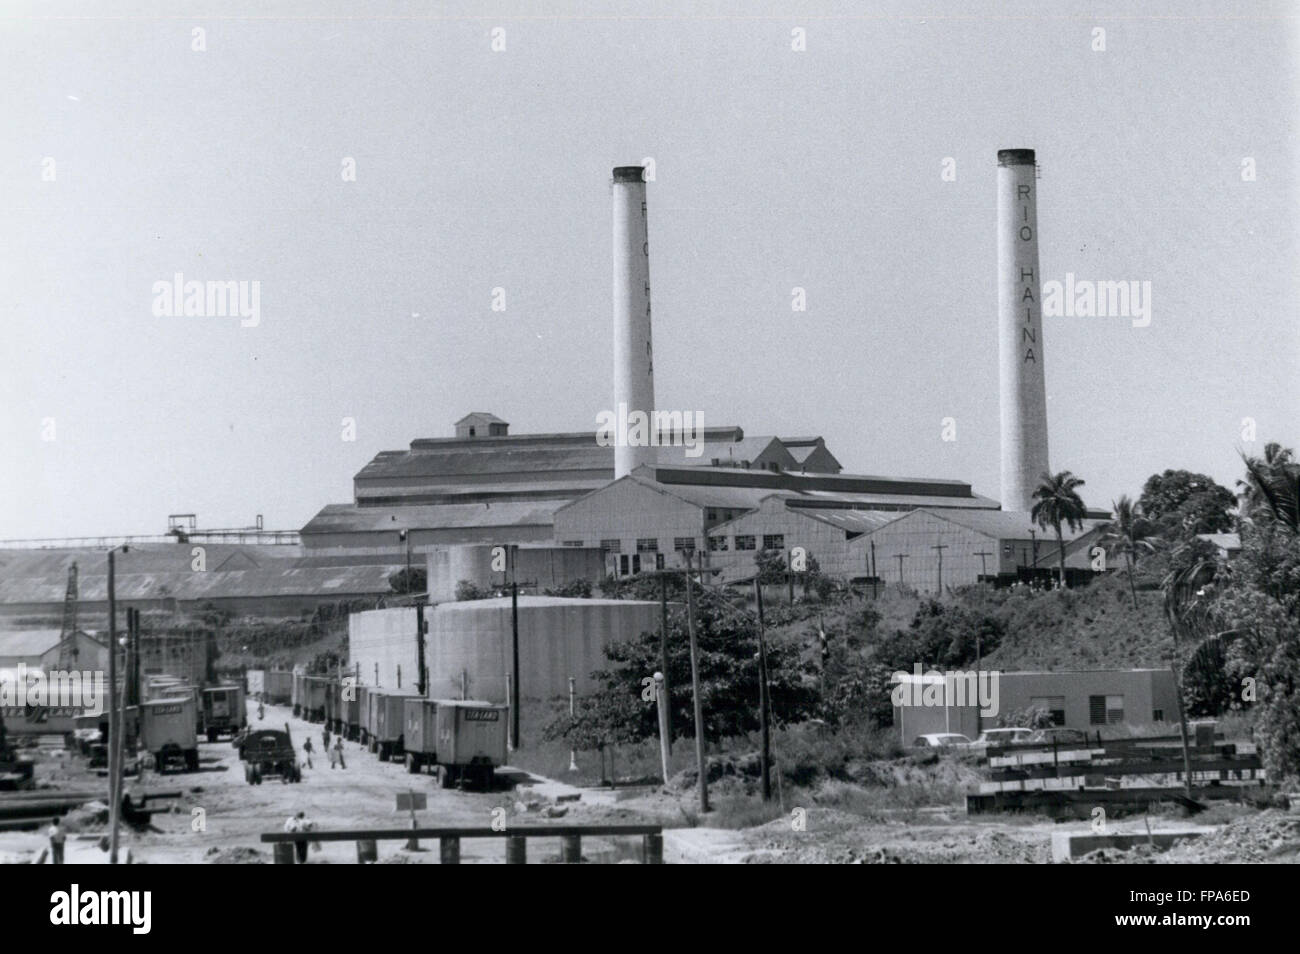 1962 - Dominican Republic One of the world's largest sugar refineries in the outskirts of the Capital city of Santo Domingo owned by the Rio Haina company. © Keystone Pictures USA/ZUMAPRESS.com/Alamy Live News Stock Photo